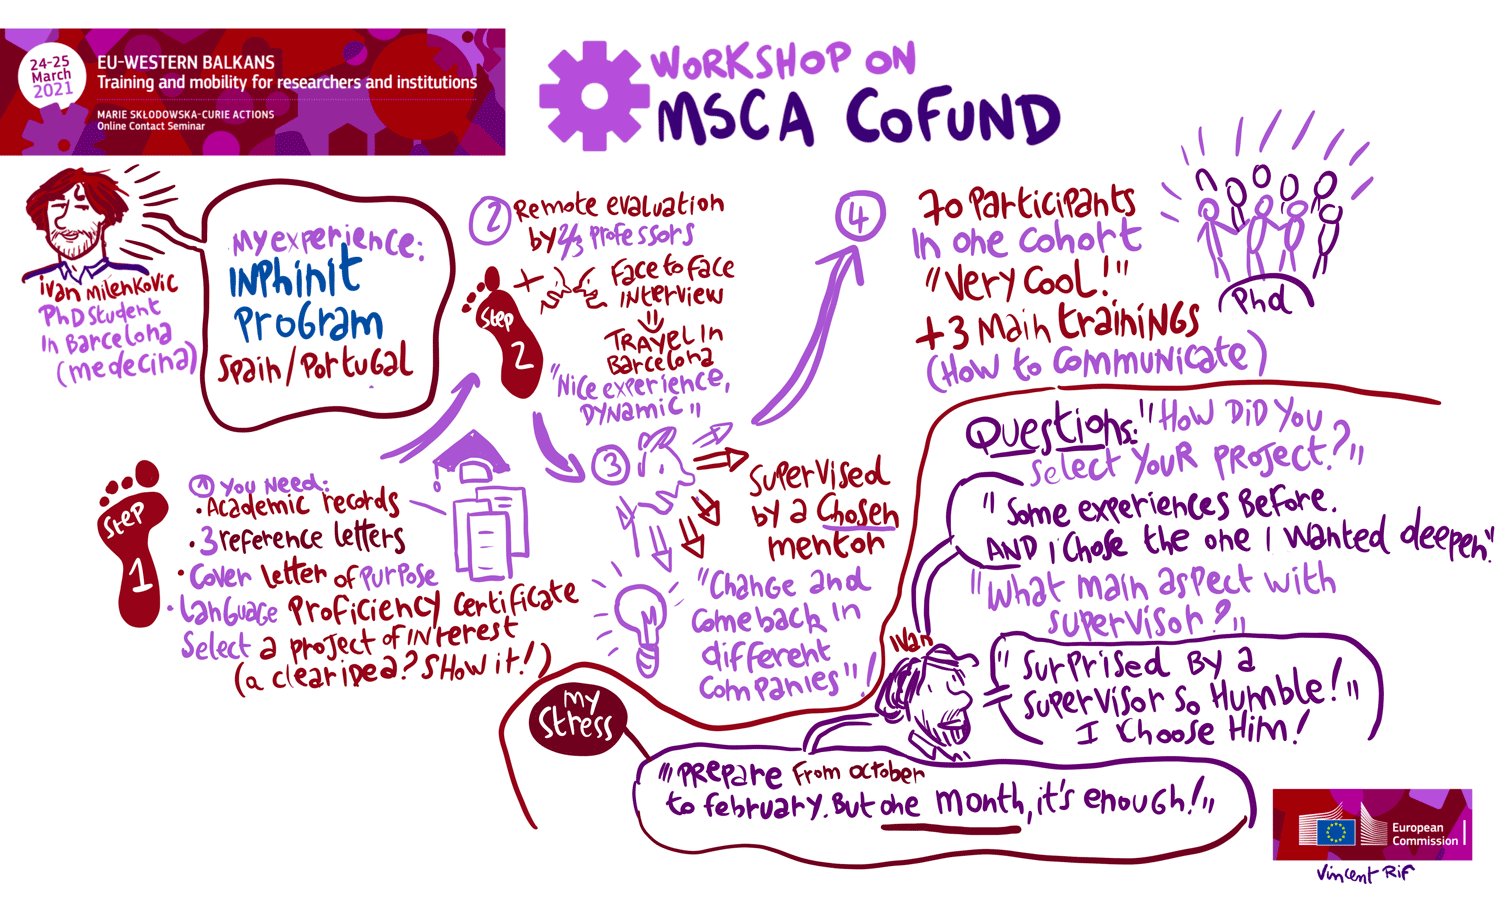 Marie Skłodowska-Curie Actions (MSCA) cofund - An Graphic Recording of Vincent Rif, drawnalist - 25th March 2021